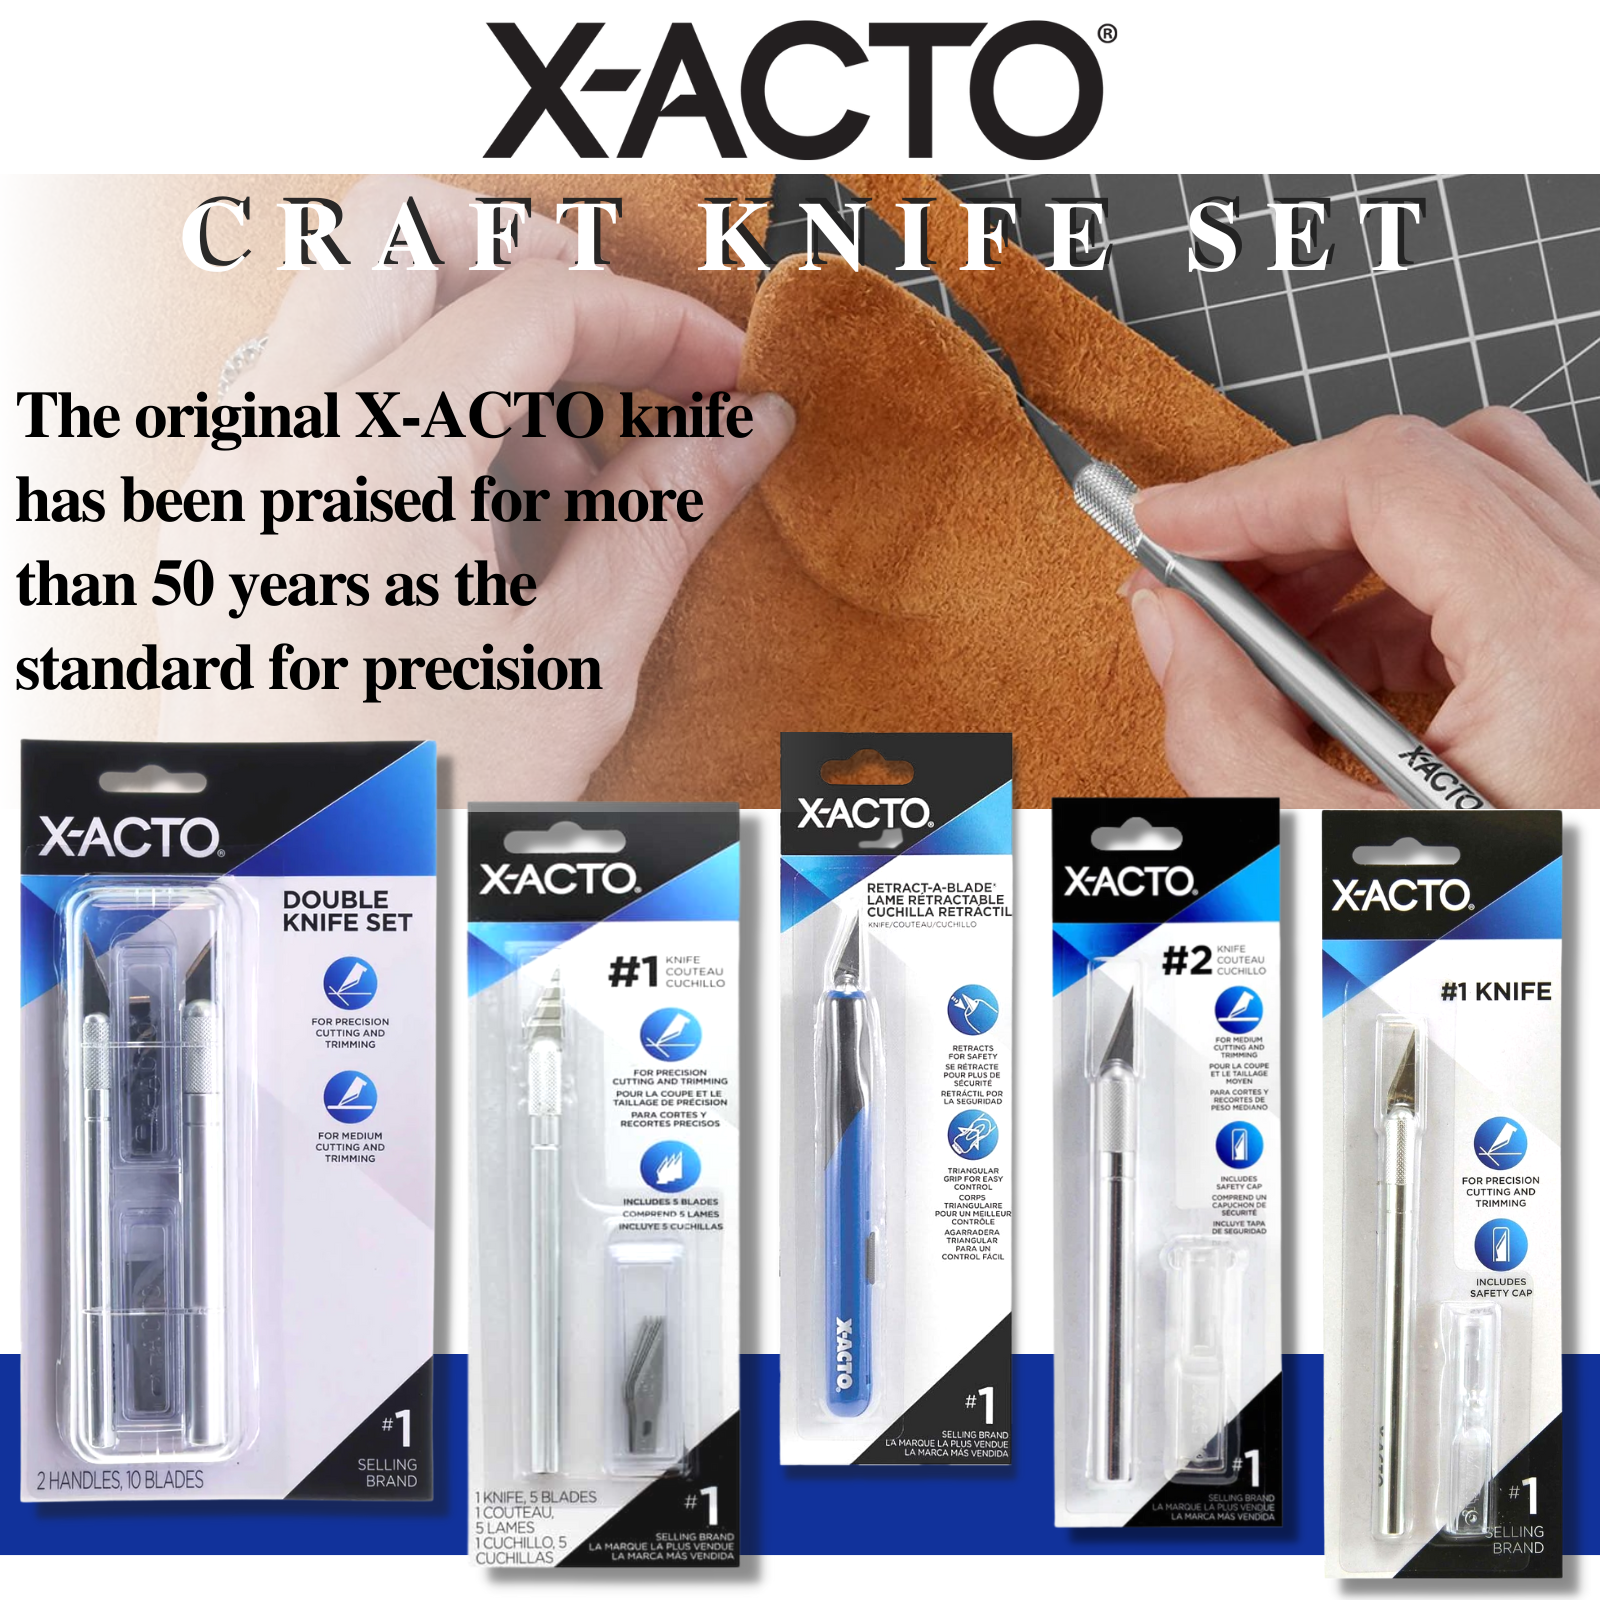 X-Acto Craft Knife Set, Precision Knife, Cutting, Tool, Trimming